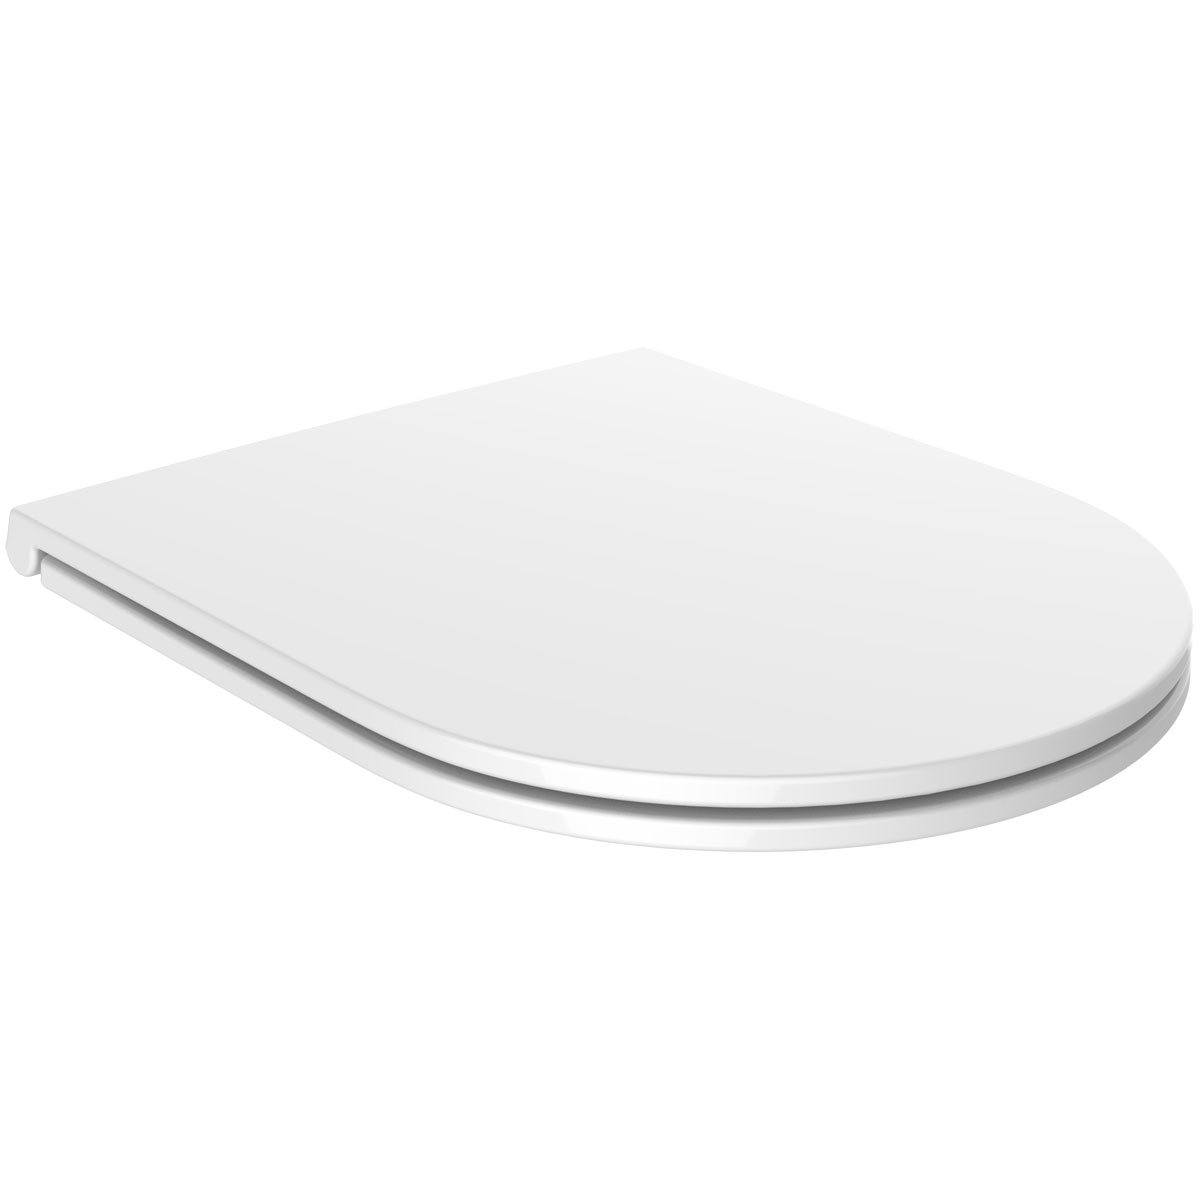 Middle D Style Slimline Soft Close Toilet Seat (7424)